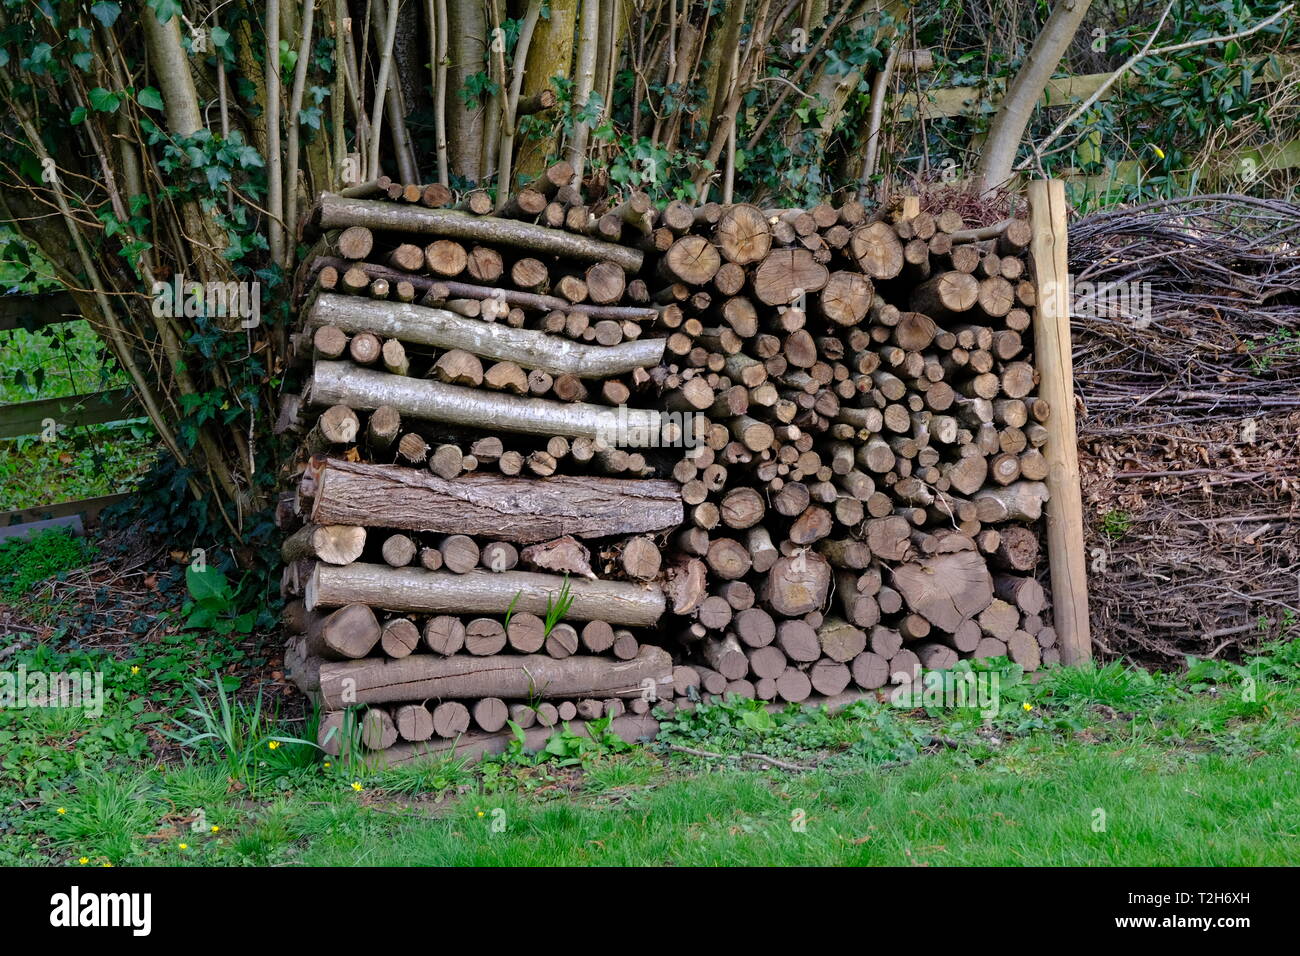 Stacked Fire, Wood, Winter Fuel, Open Fires, Drying, Firewood, Cut Fuel, Wood Stack, Logs, Lumber, Hard Wood, Ecological Fuel.. Stock Photo